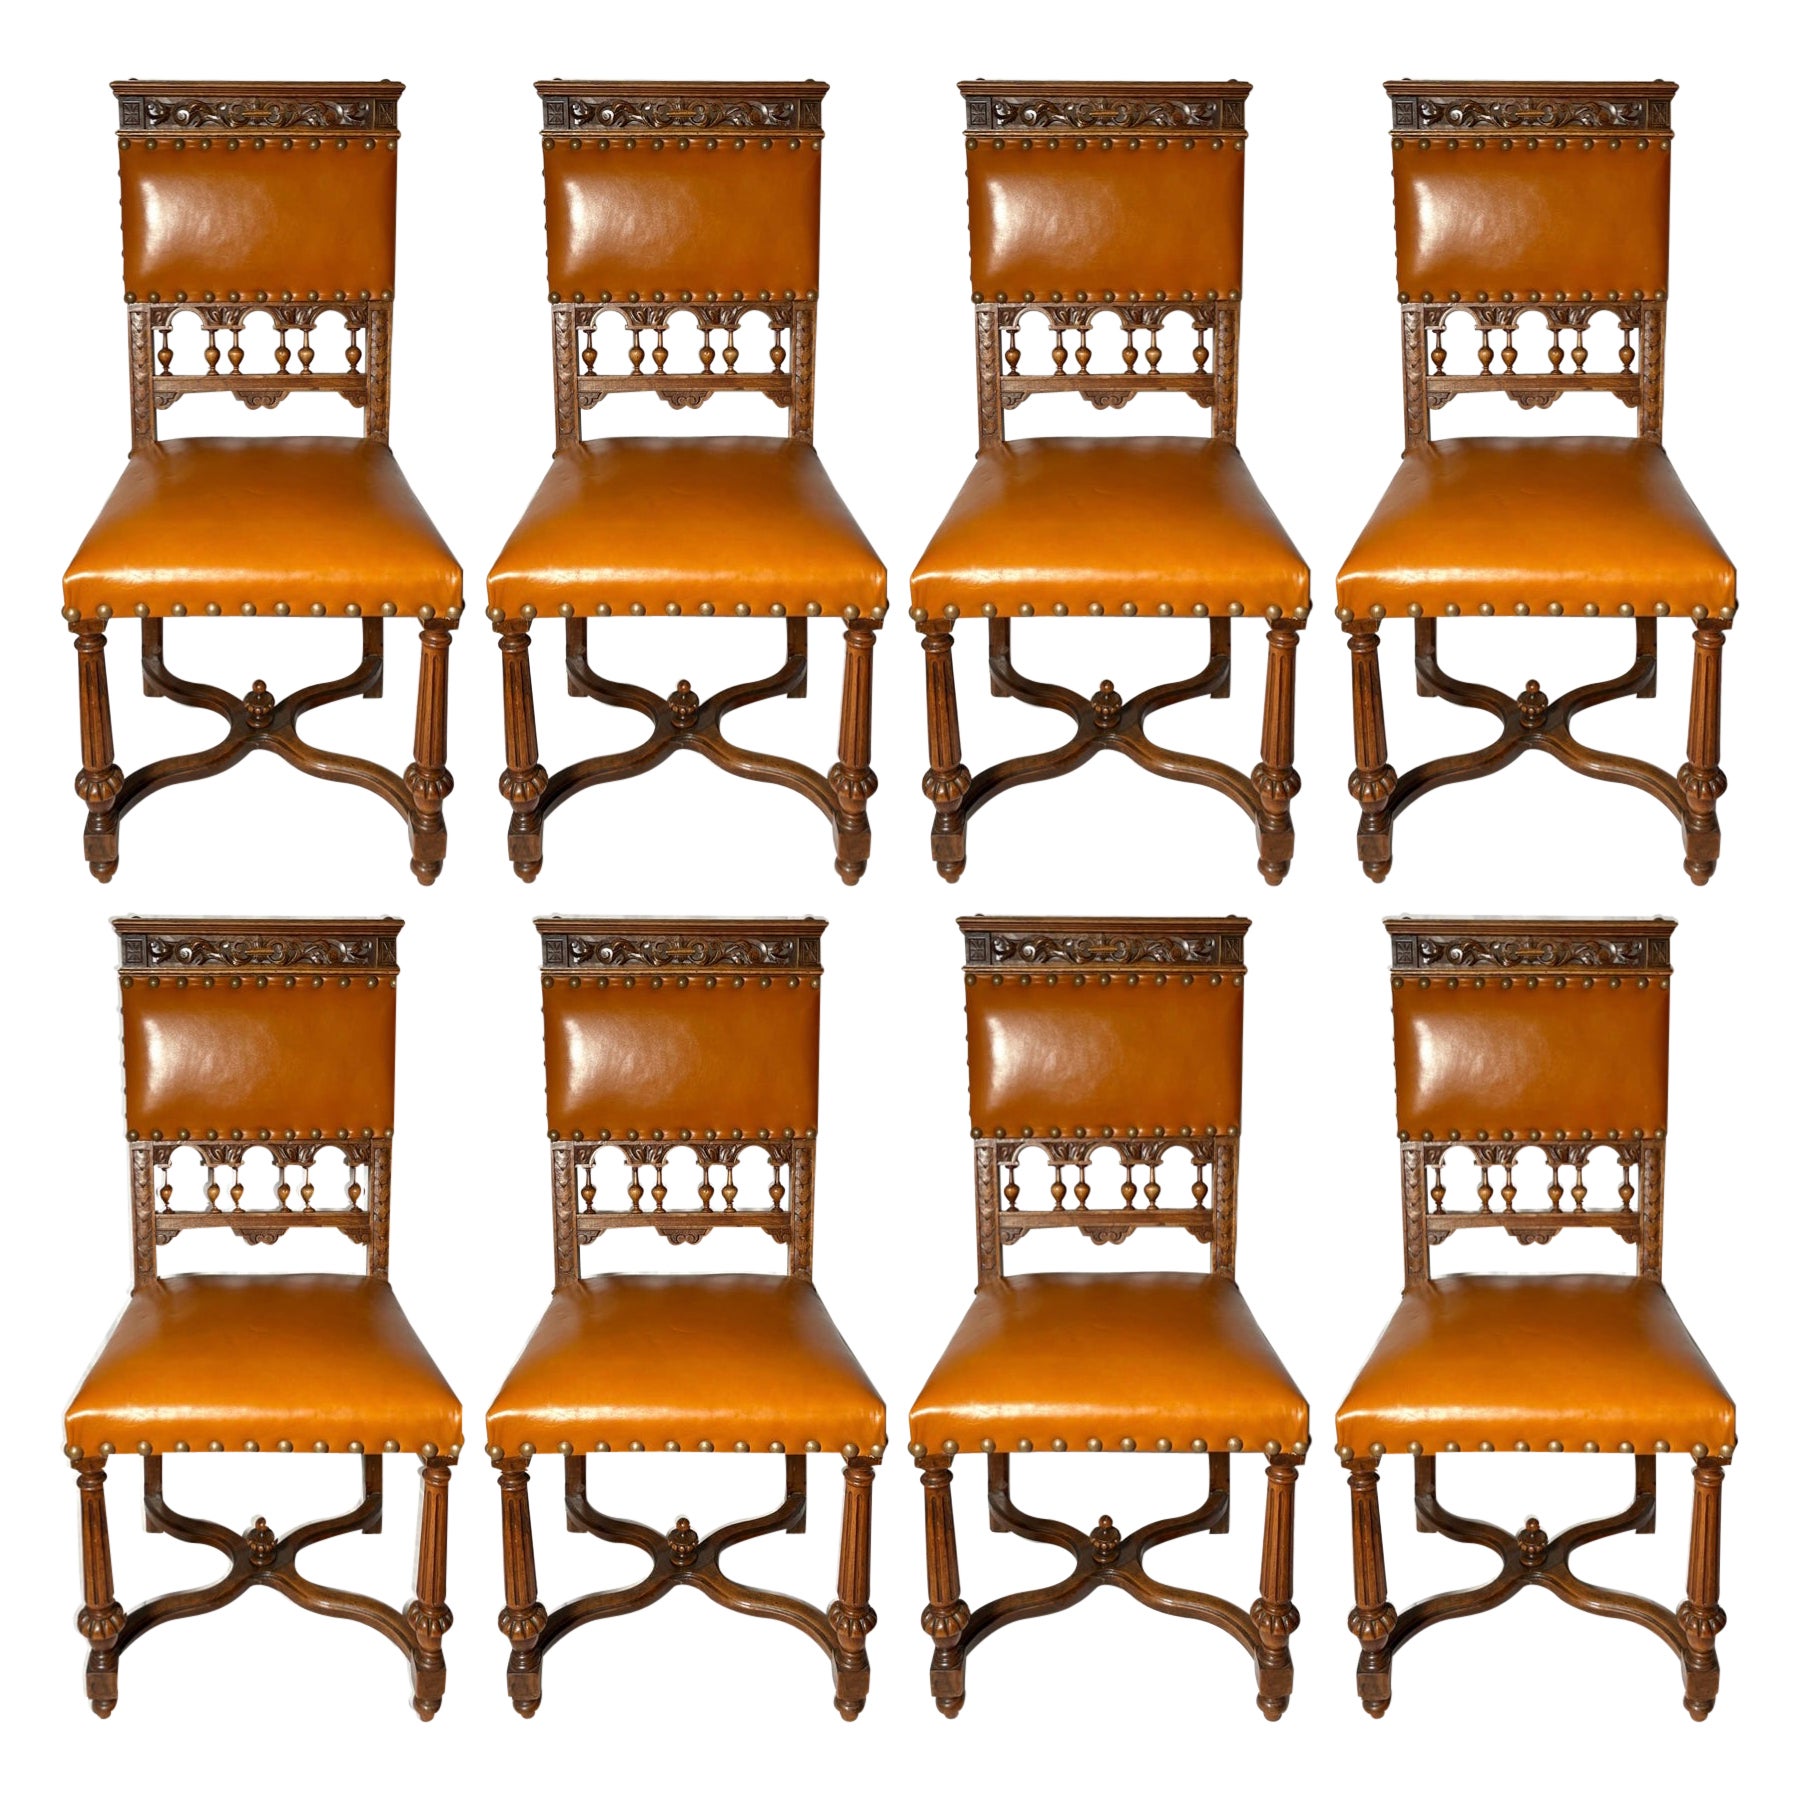 Set of 8 Antique French "Francois Premier" Walnut Dining Chairs, circa 1880